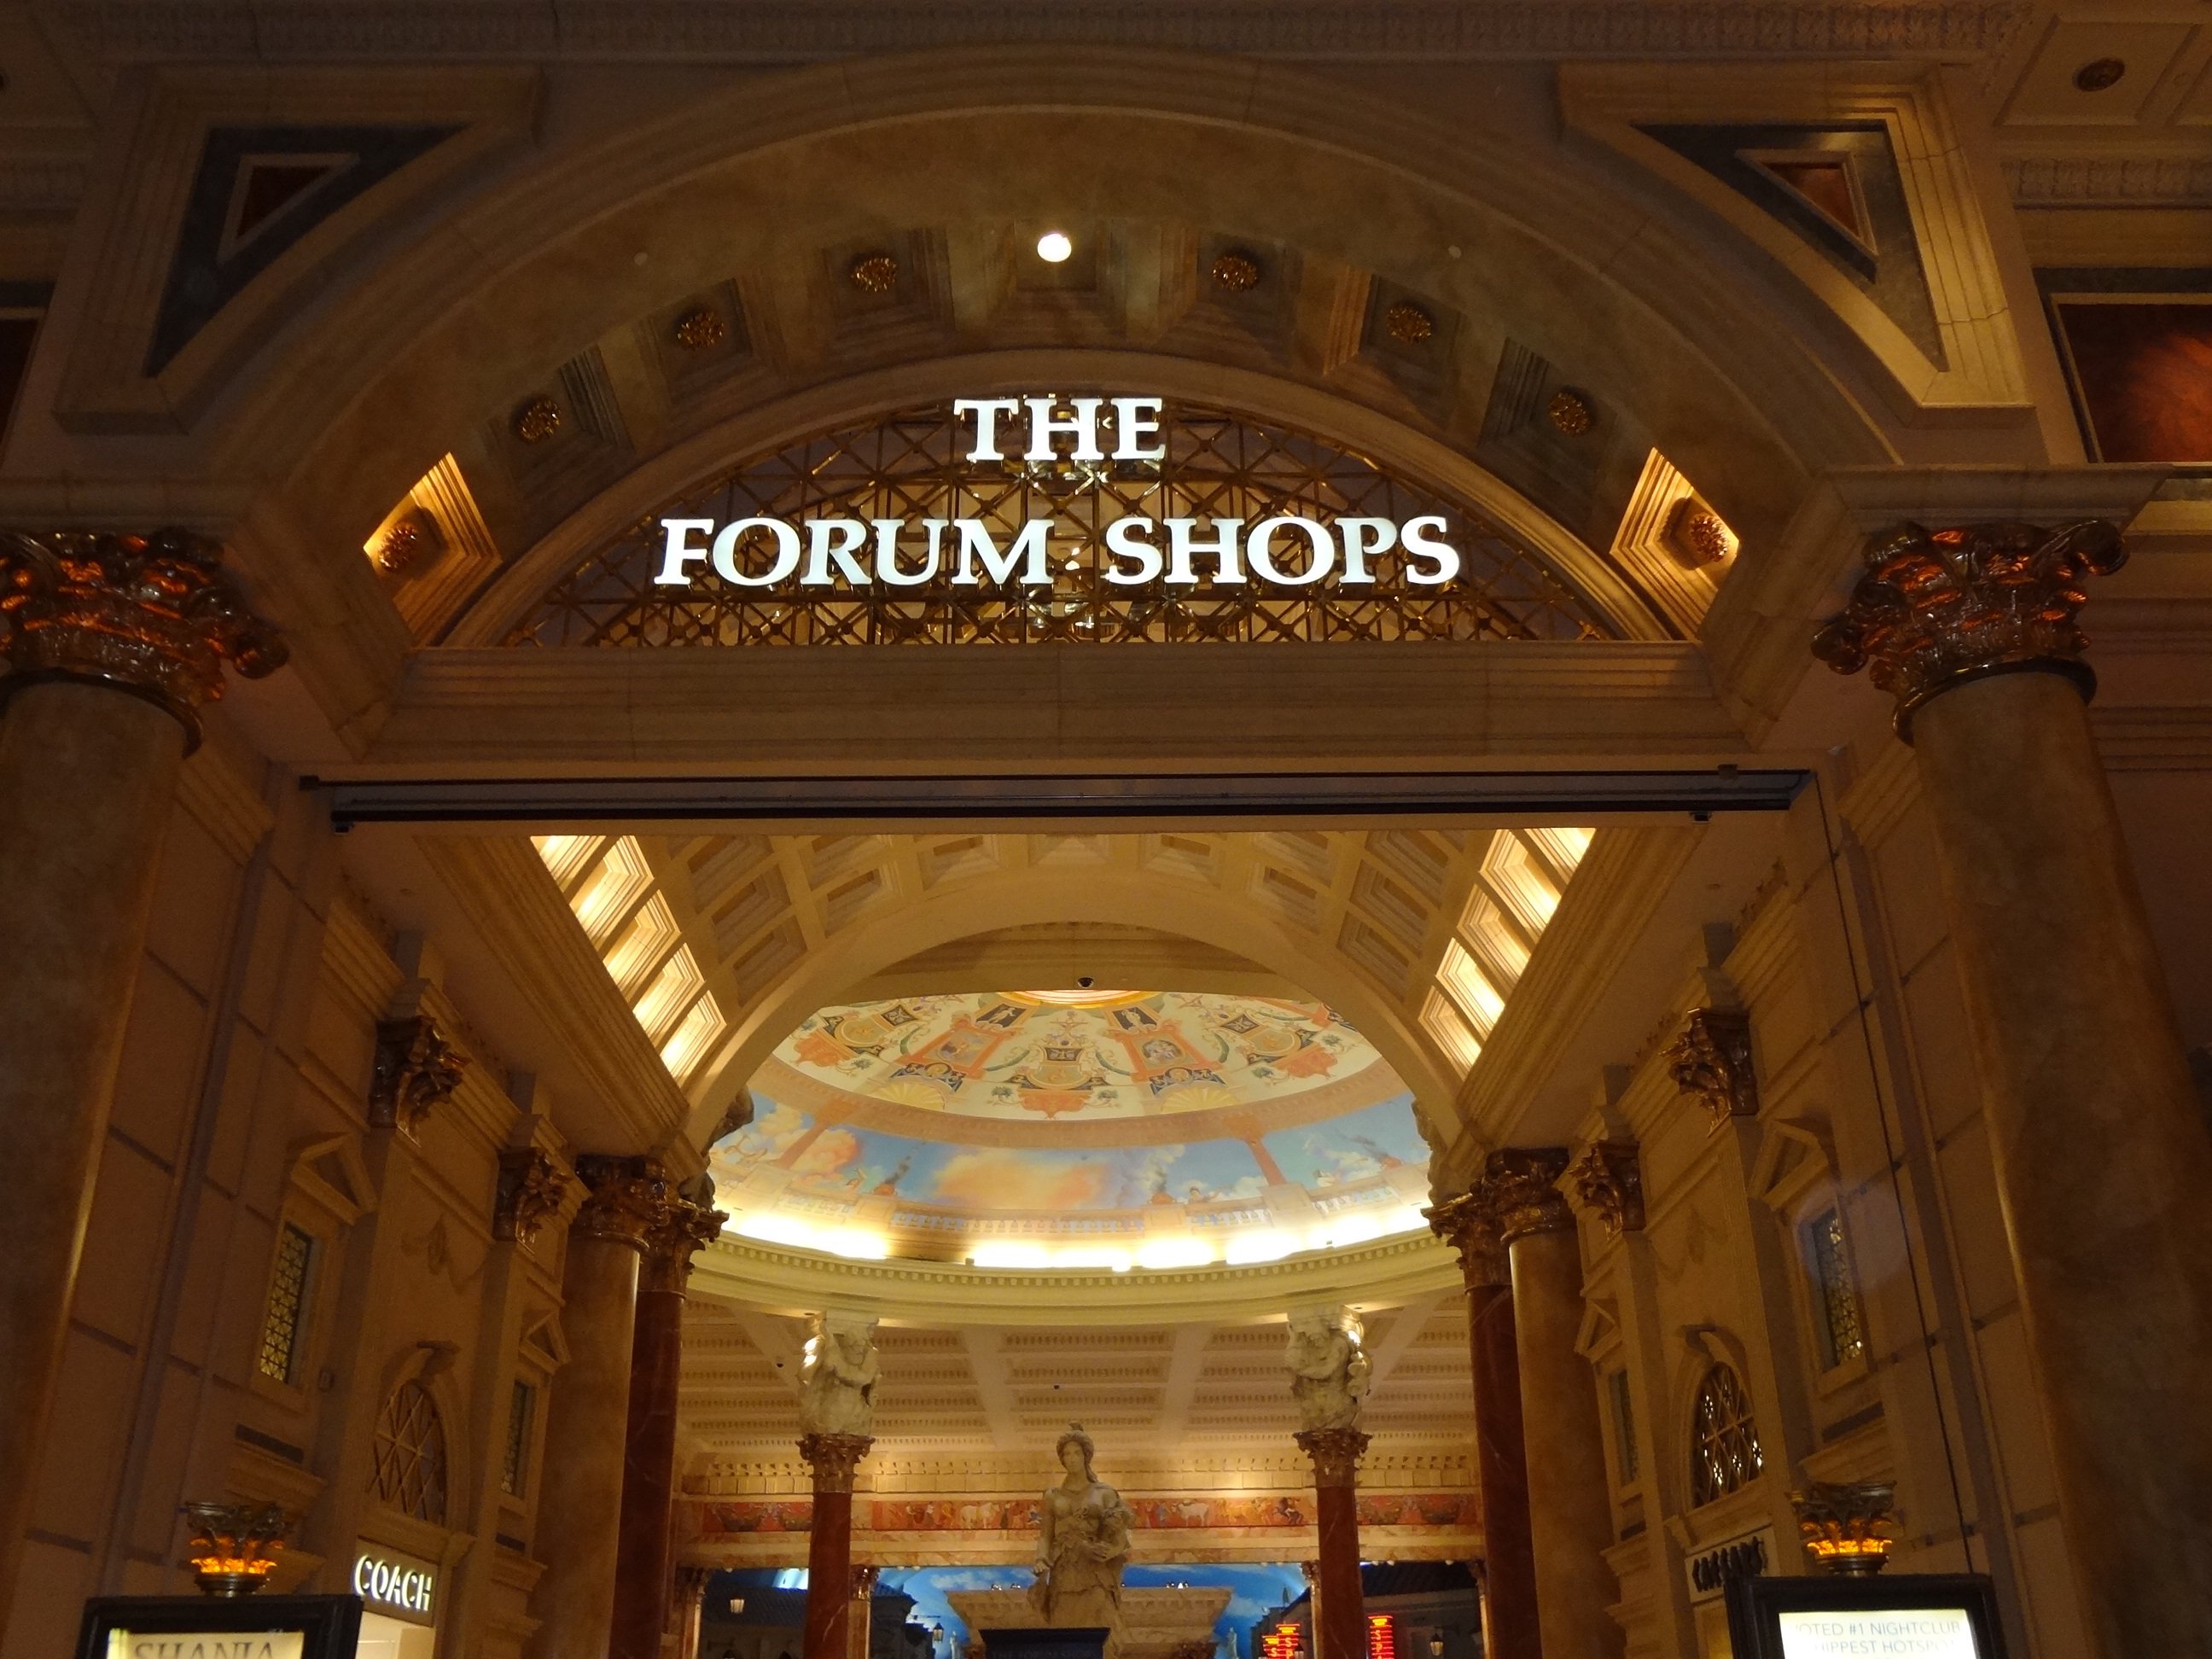 The Forum Shops at Caesars attached to Caesars Palace Casino, Las